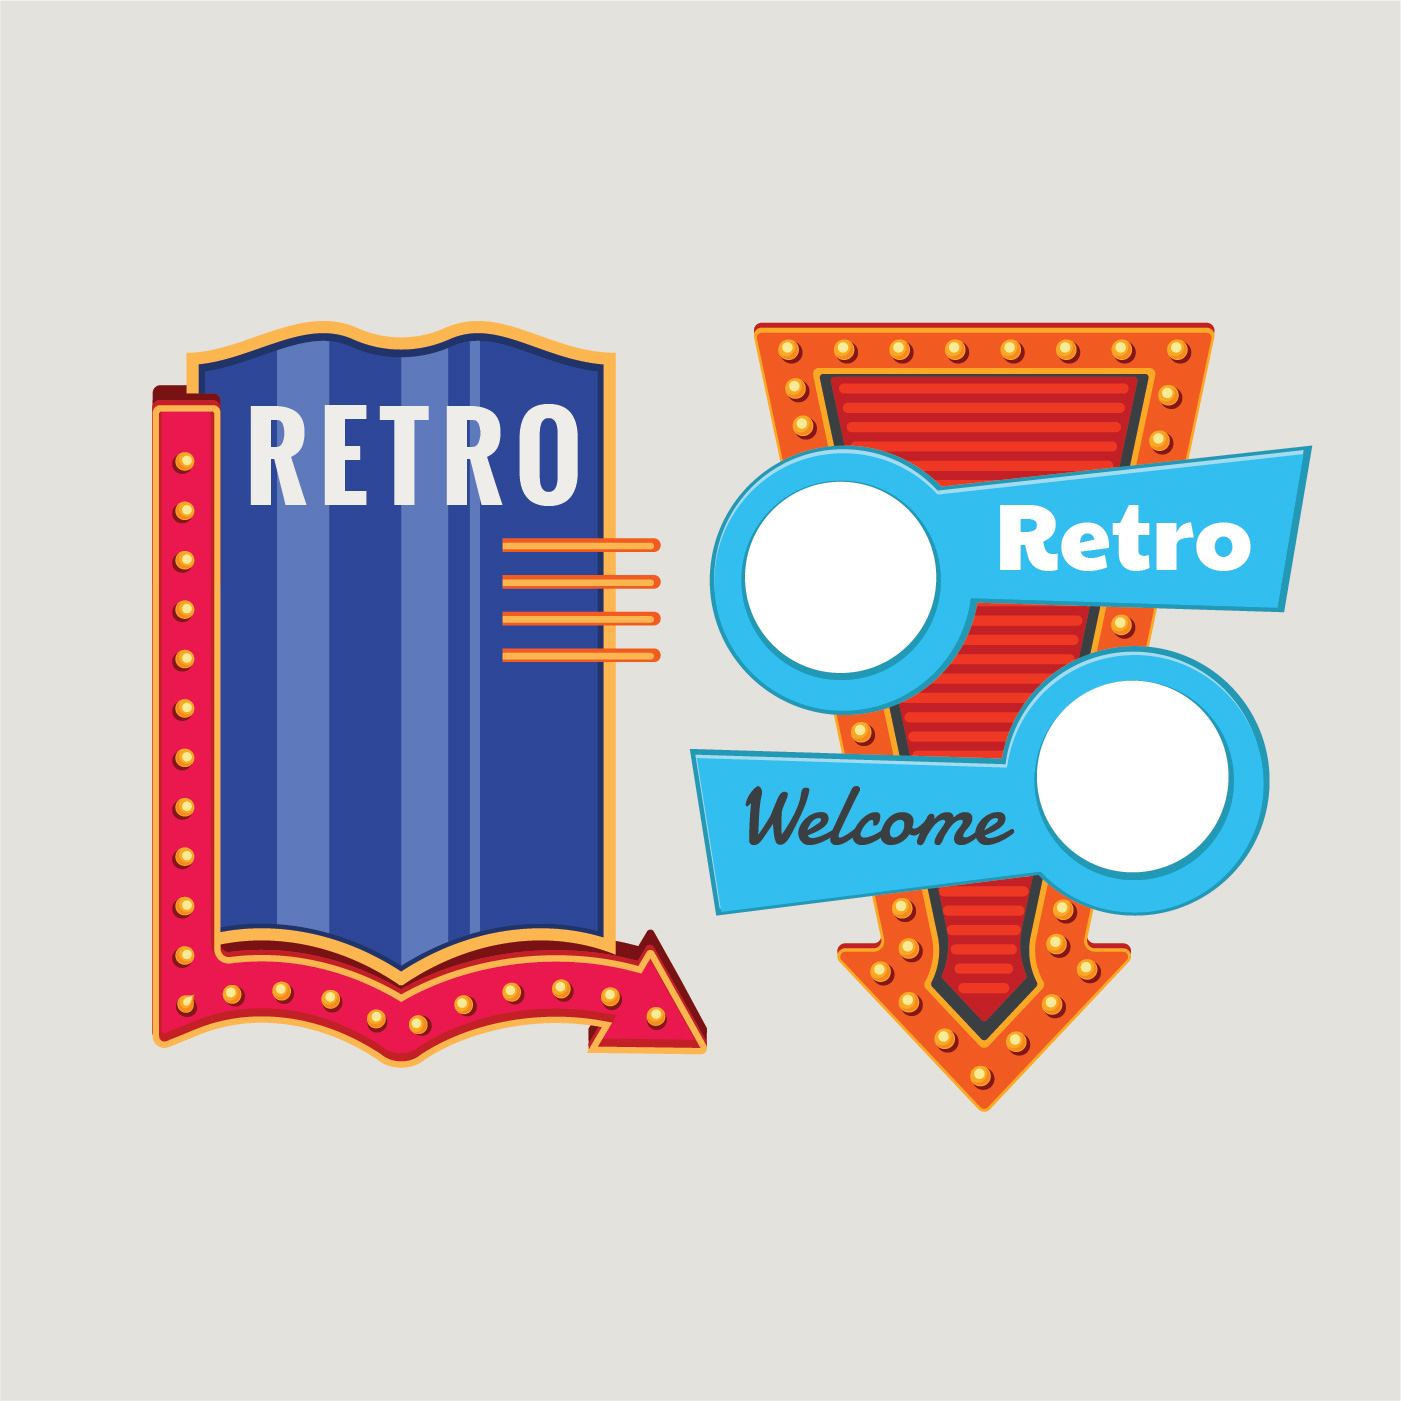 retro-or-vintage-signs-template-set-with-glowing-lamp-224351-vector-art